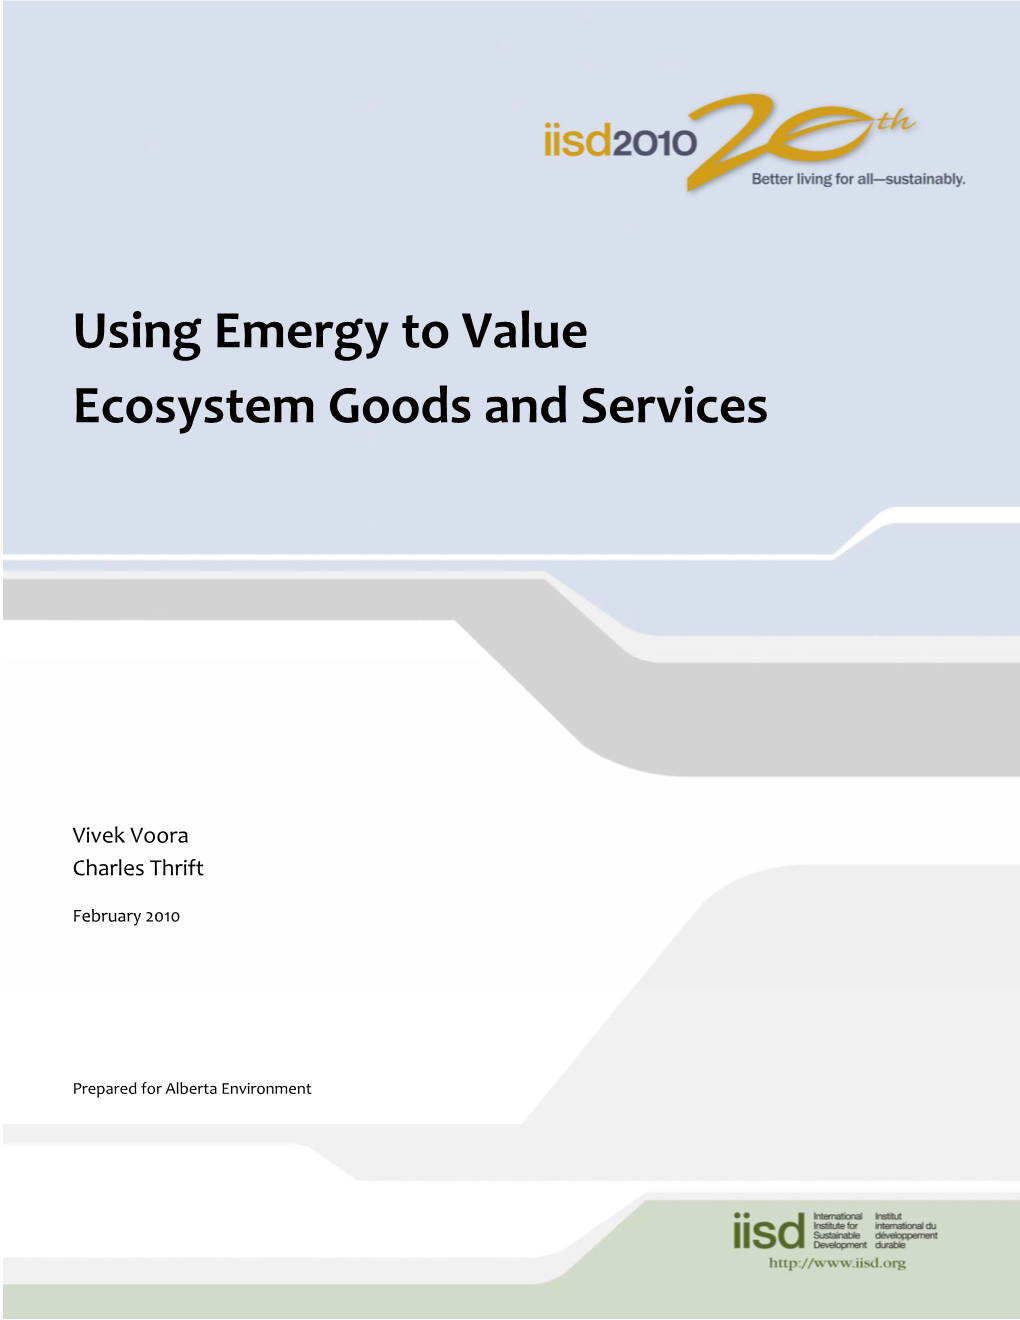 Using Emergy to Value Ecosystem Goods and Services